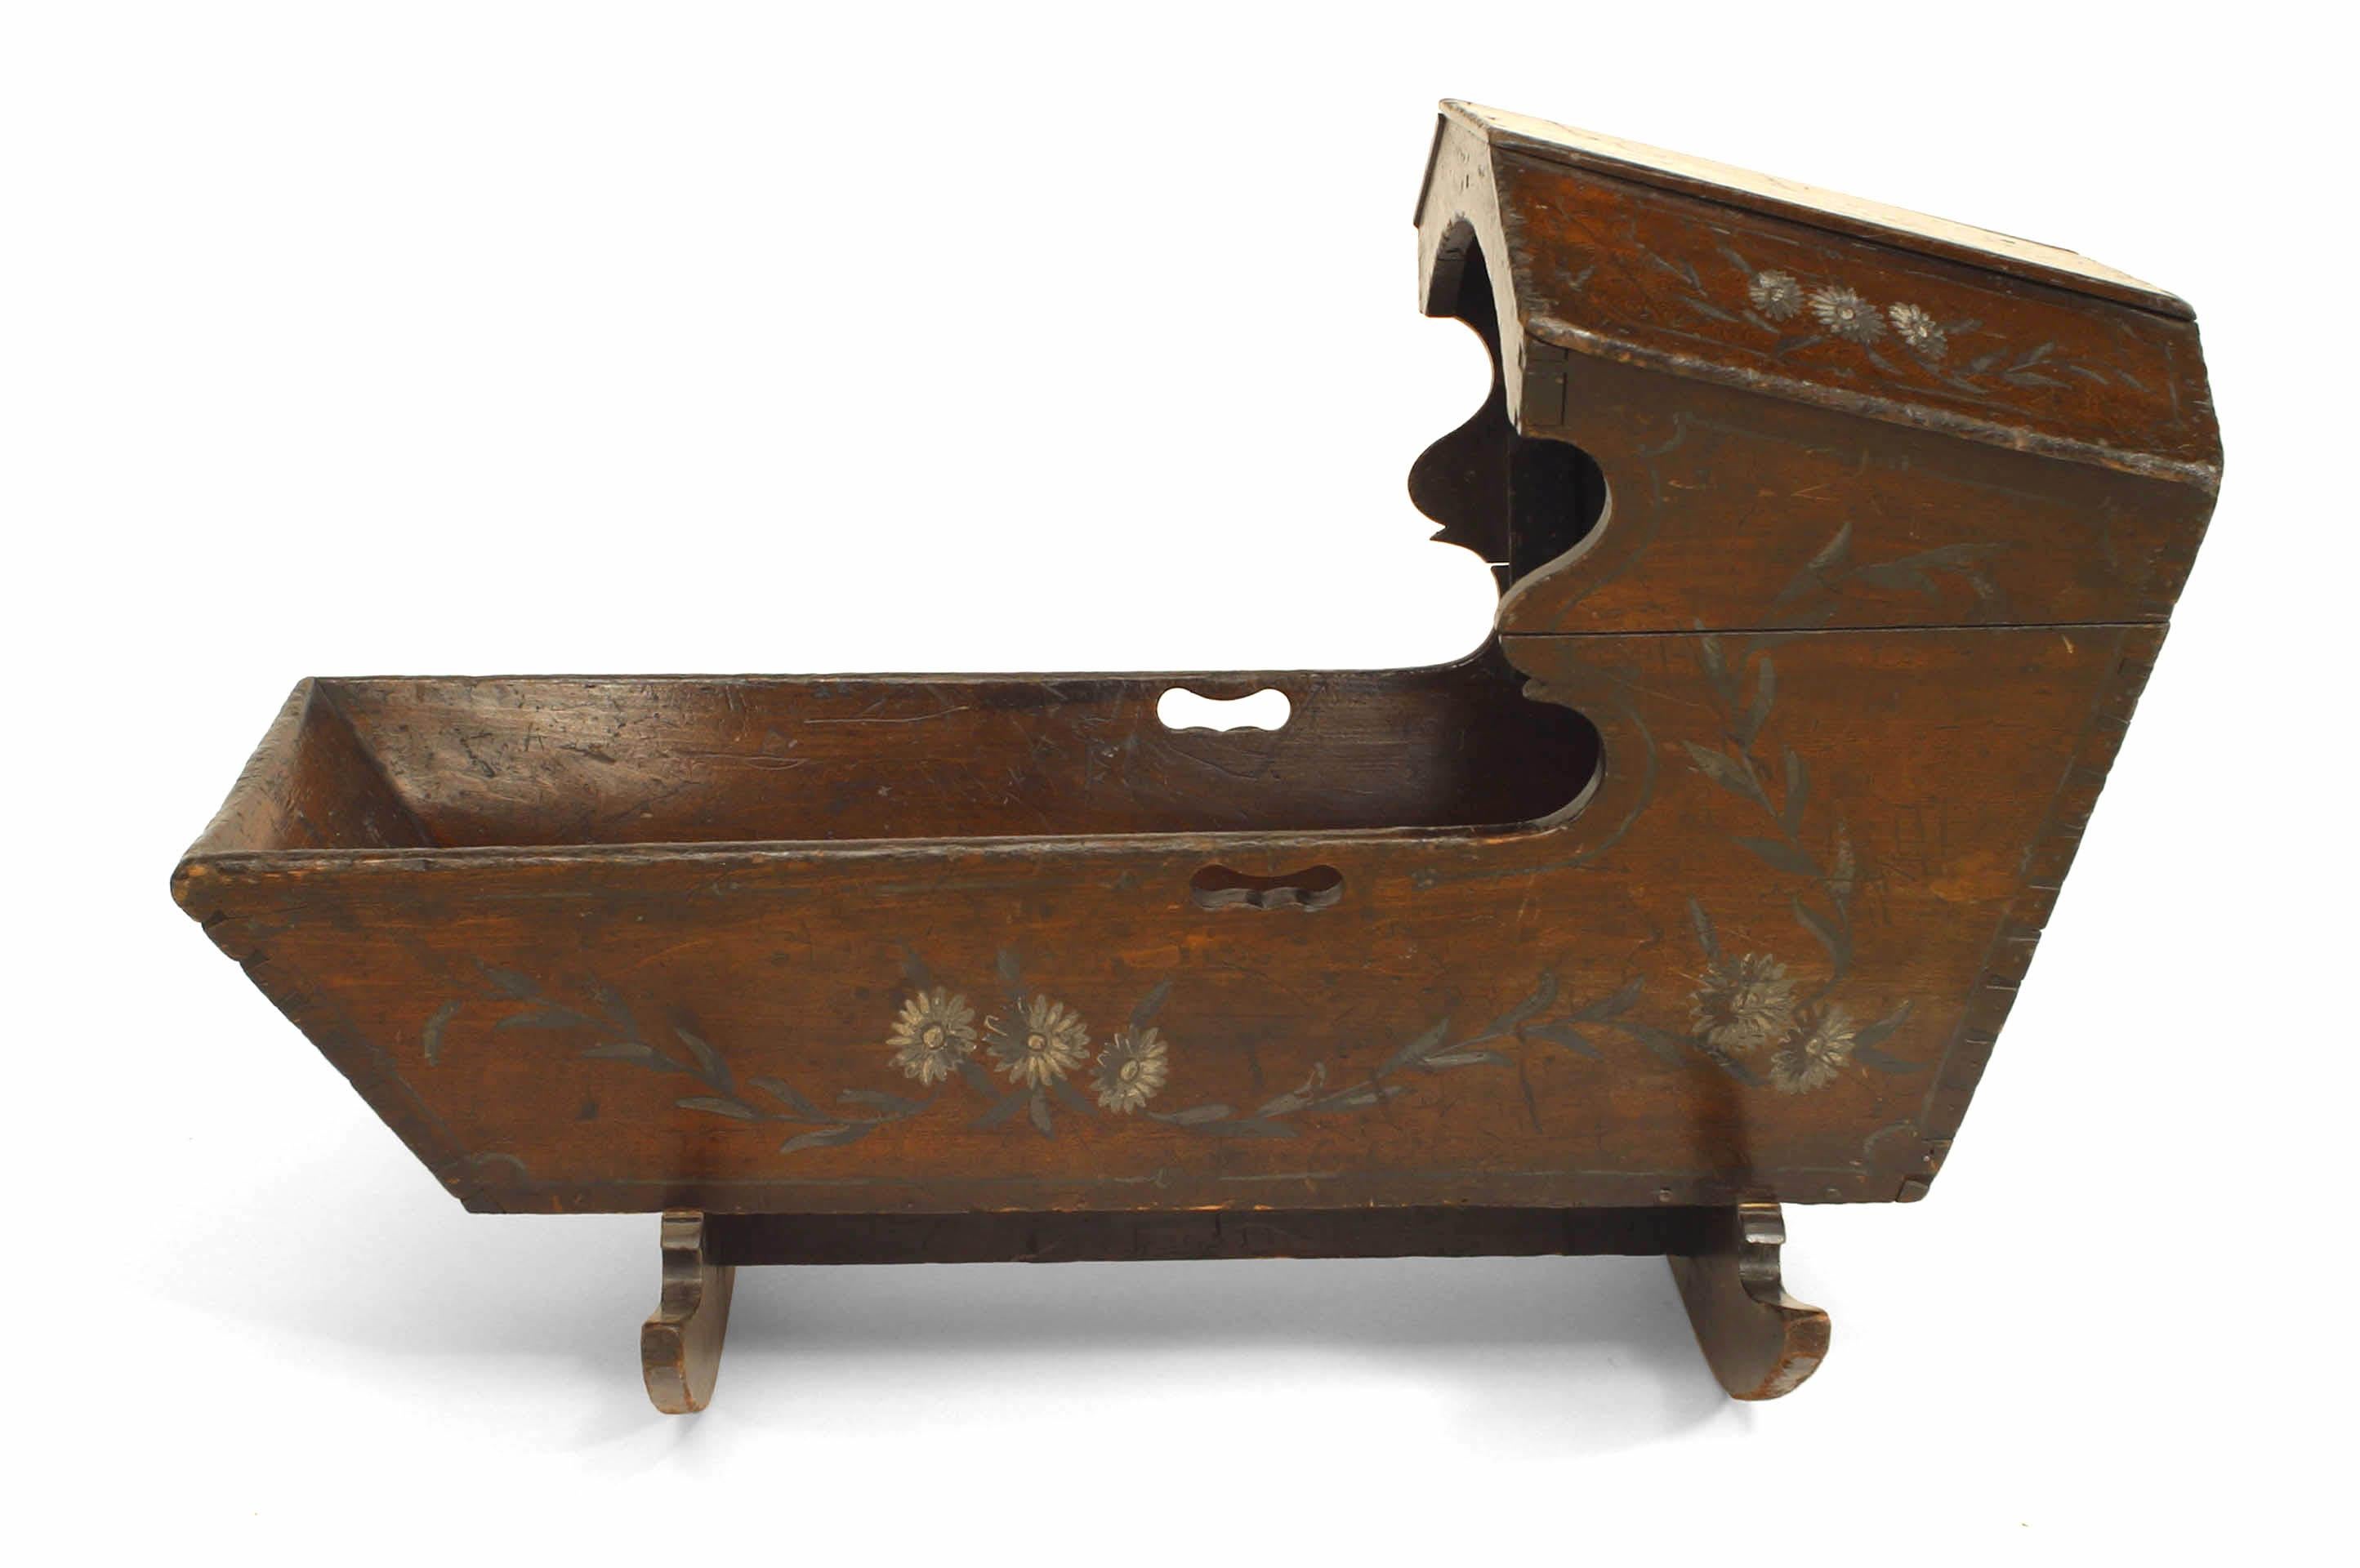 American Country style (19th Cent) stained pine rocking cradle with floral-decorated hood.
